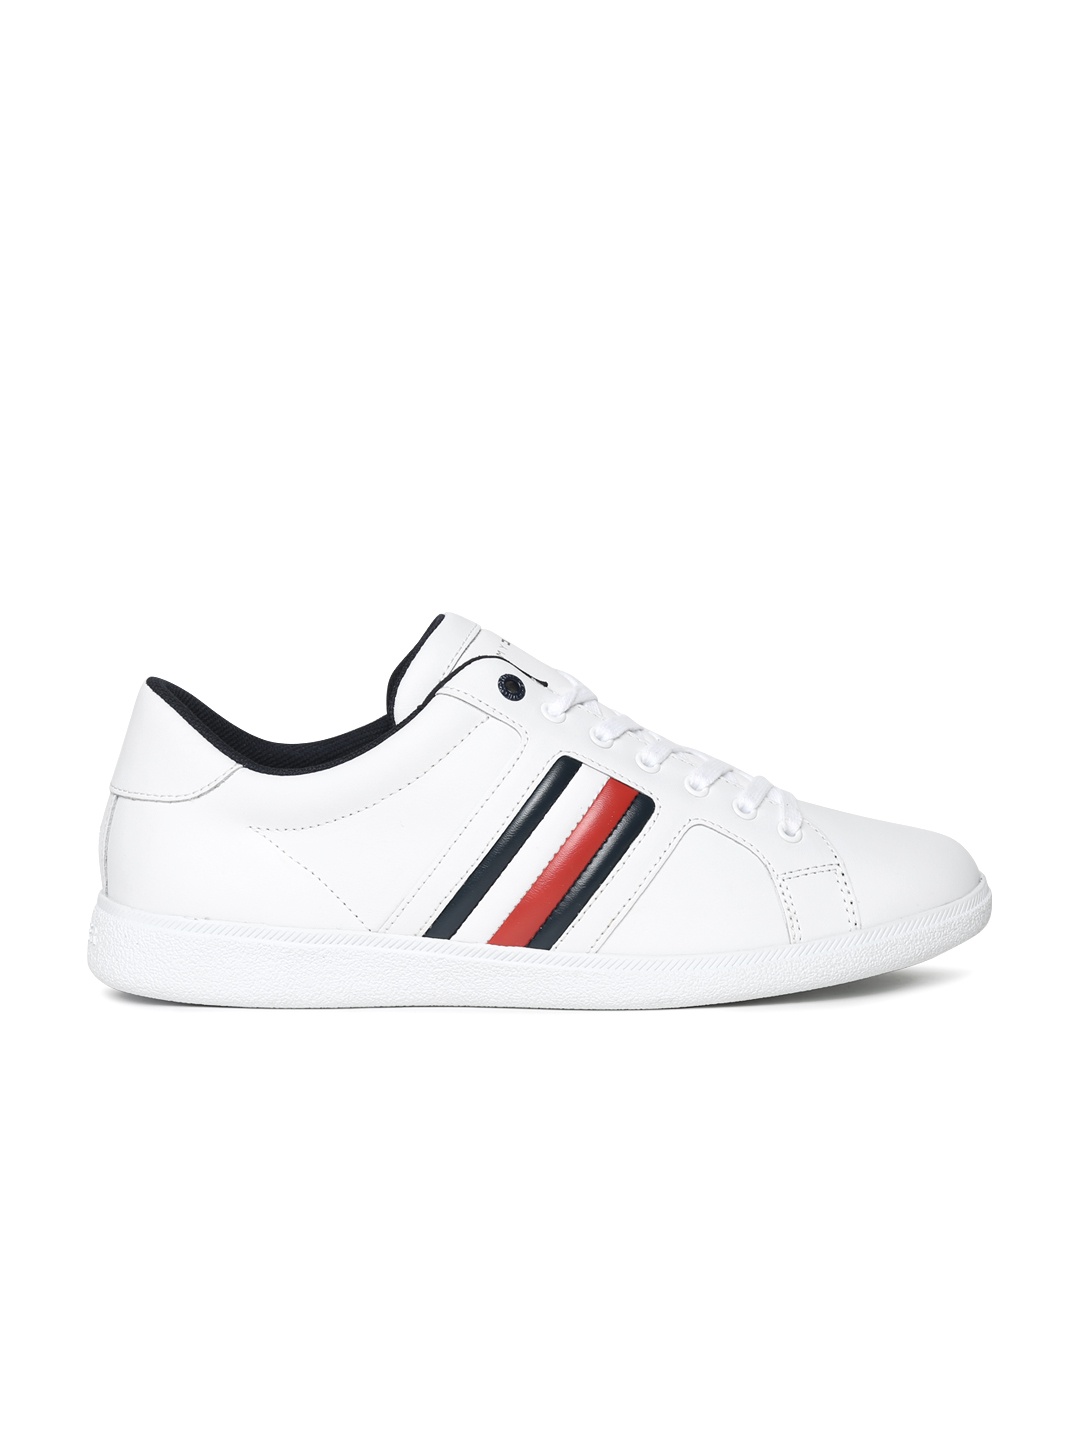 Tommy Hilfiger Men White Sneakers Tommy Hilfiger Casual Shoes price ...